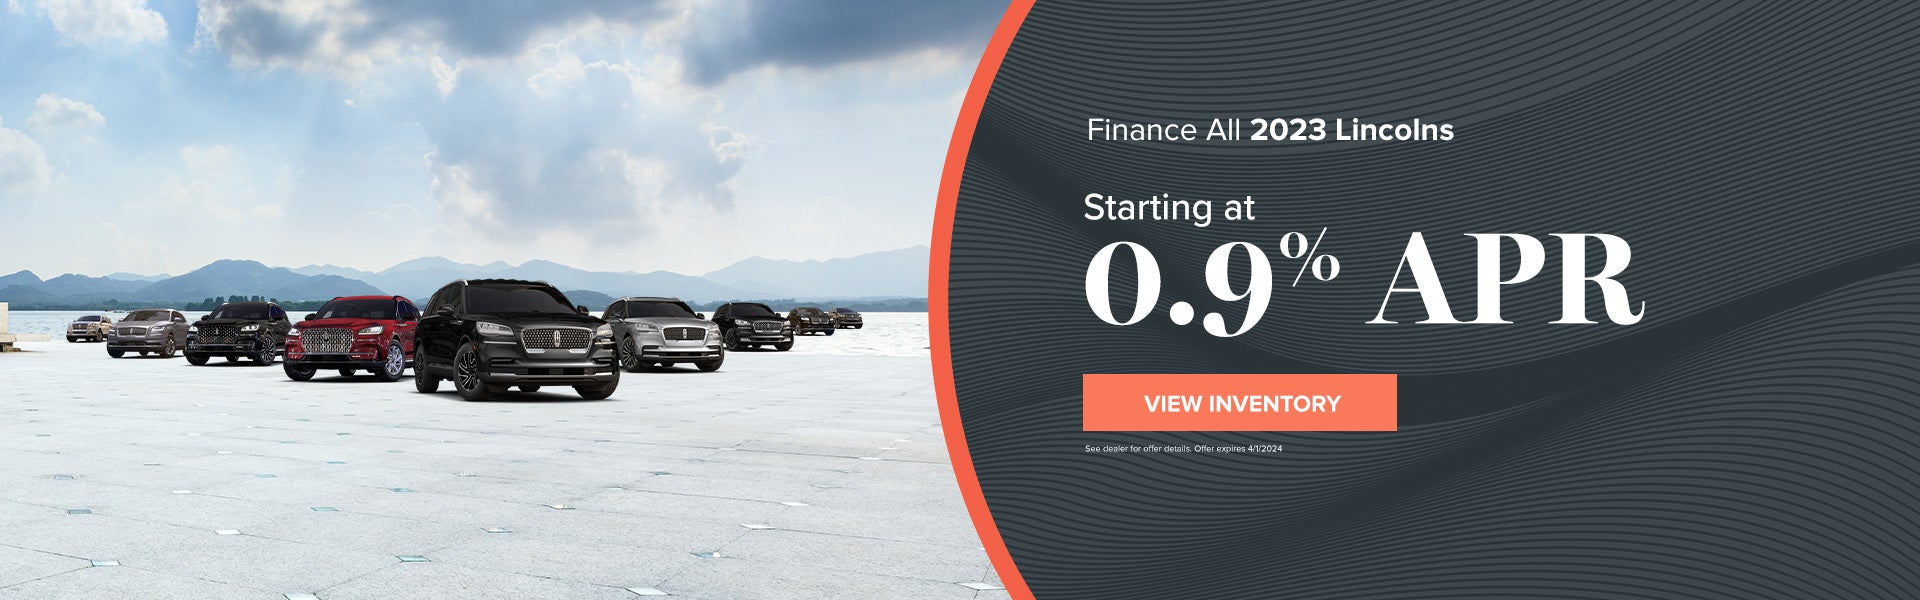 Finance all 2023 Lincolns starting at 0.9% APR 